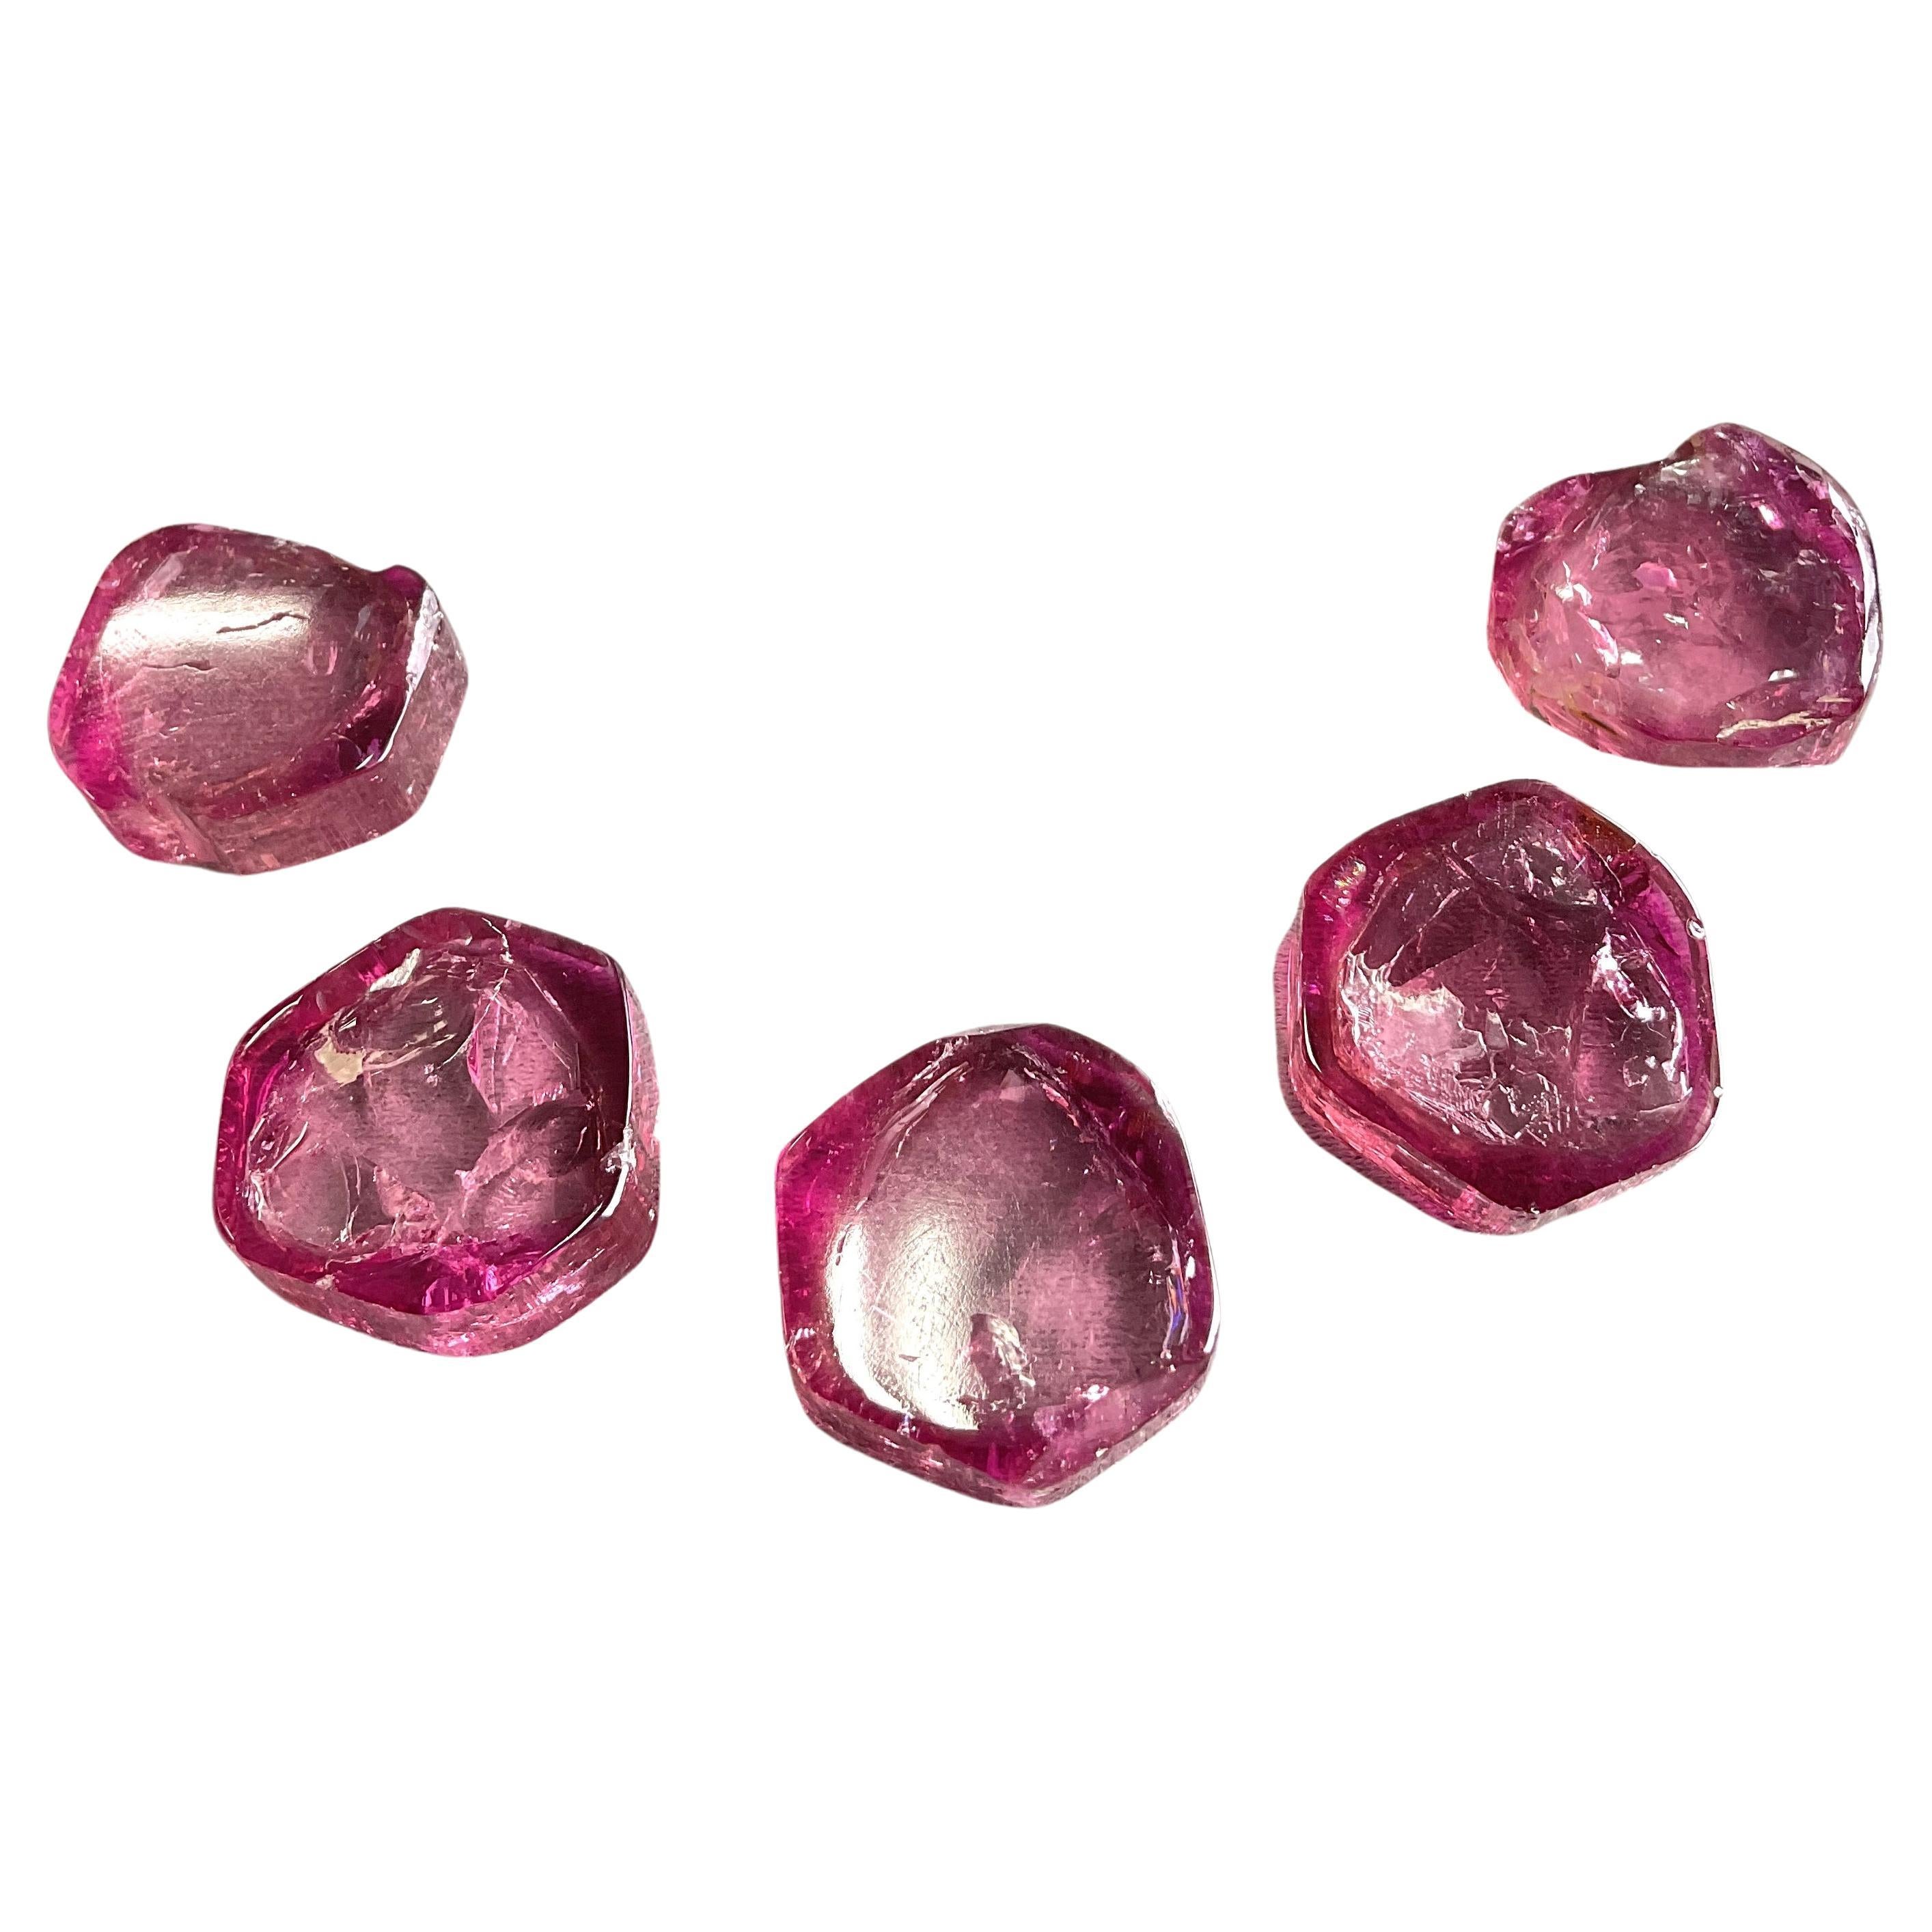 239.56 Carats Pink Color Tourmaline Natural Slices For Top Fine Jewelry Gemstone For Sale